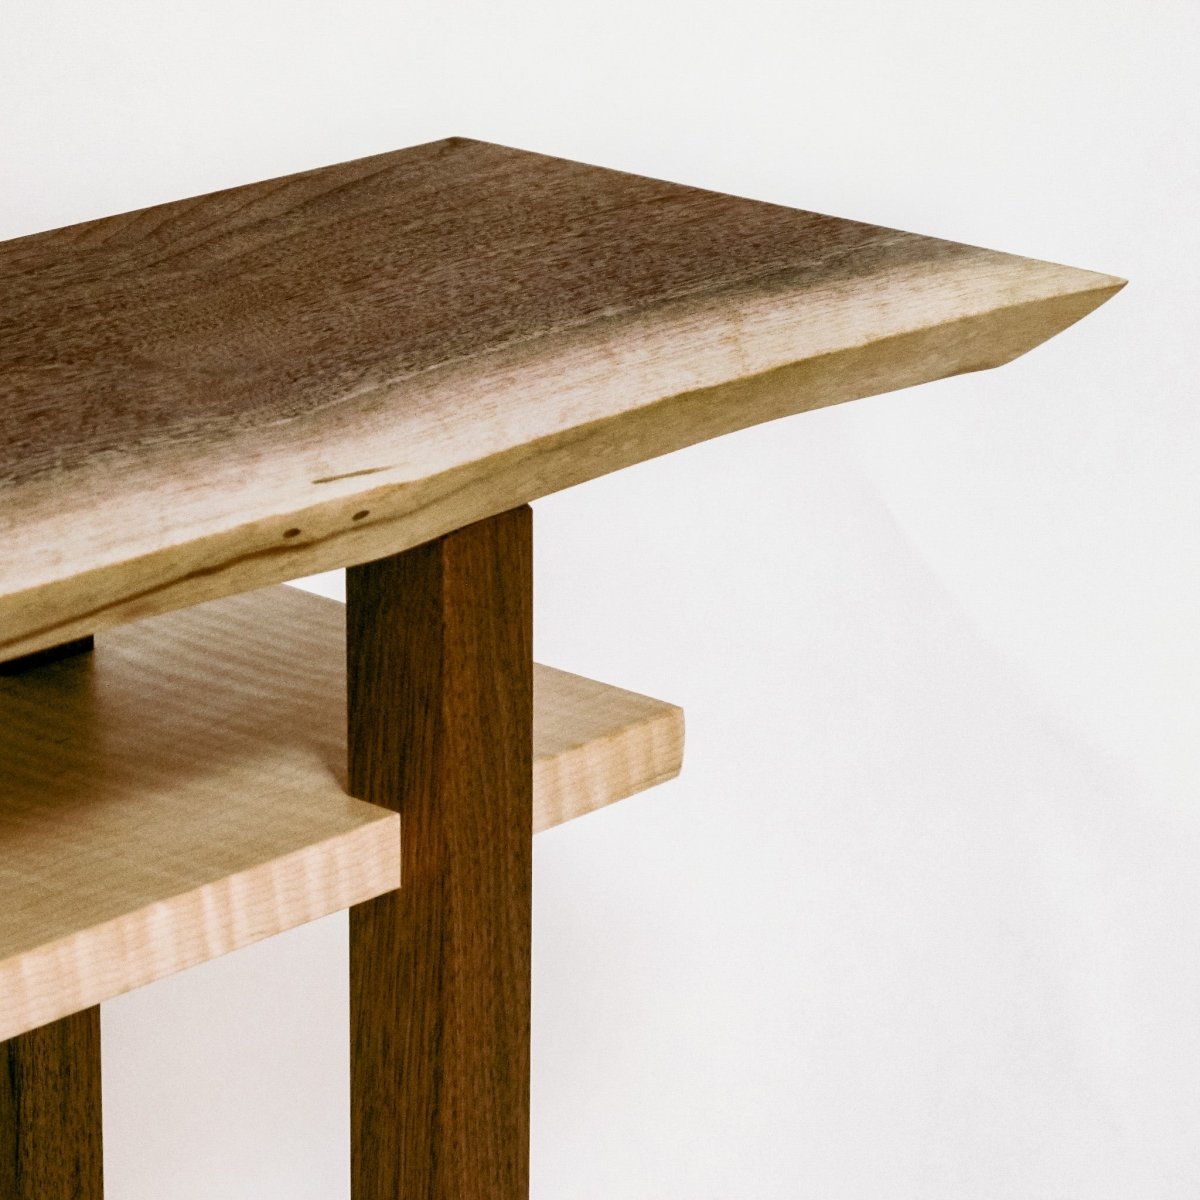 A minimalist live edge end table with tiger maple shelf by Mokuzai Furniture